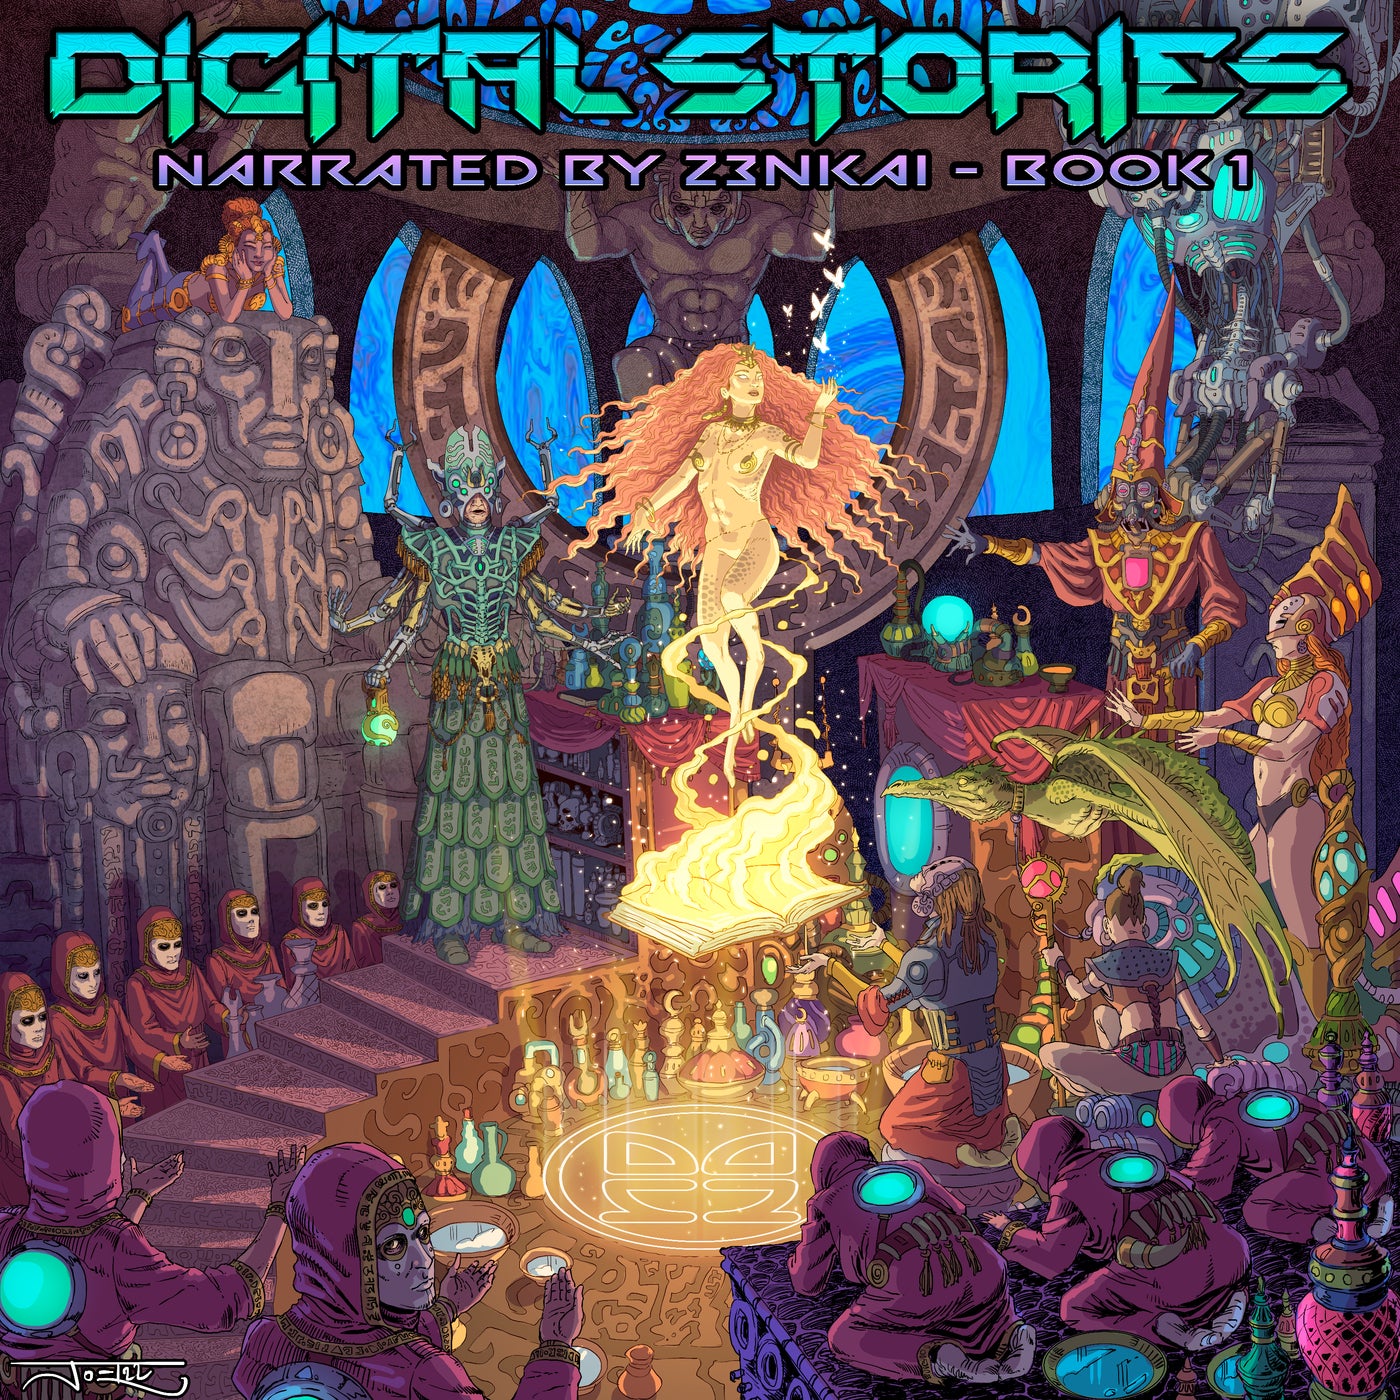 Digital Stories Book 1 - Narrated by Z3nkai